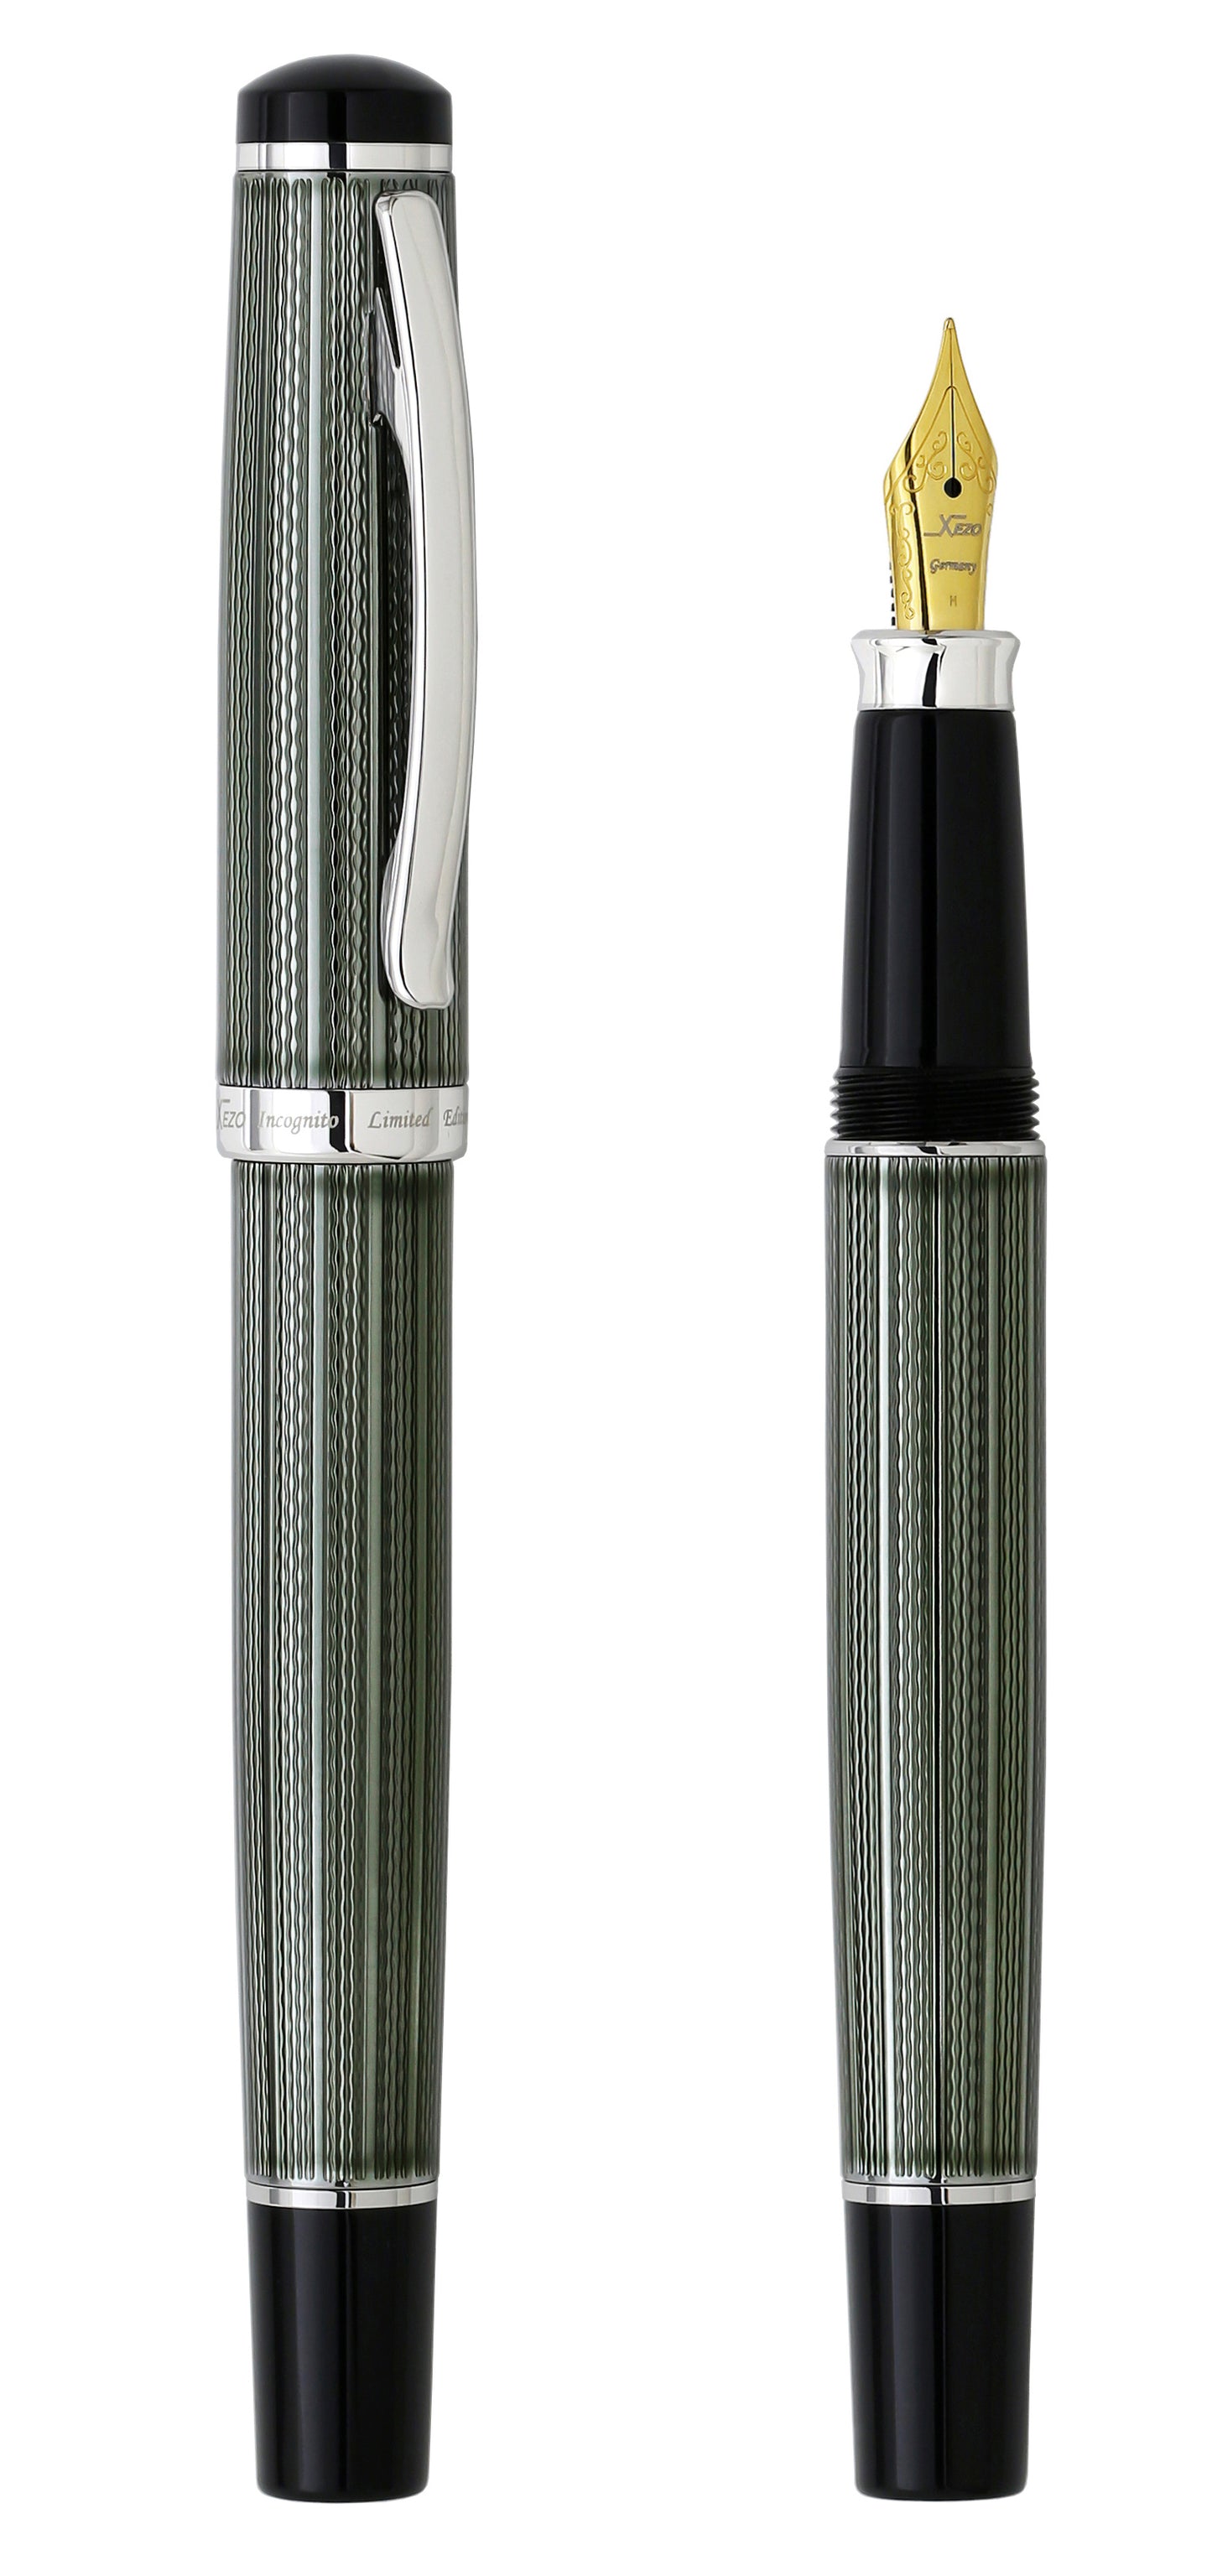 Xezo - Comparison between the angled side view of the capped and uncapped  Incognito Zinc FM fountain pens